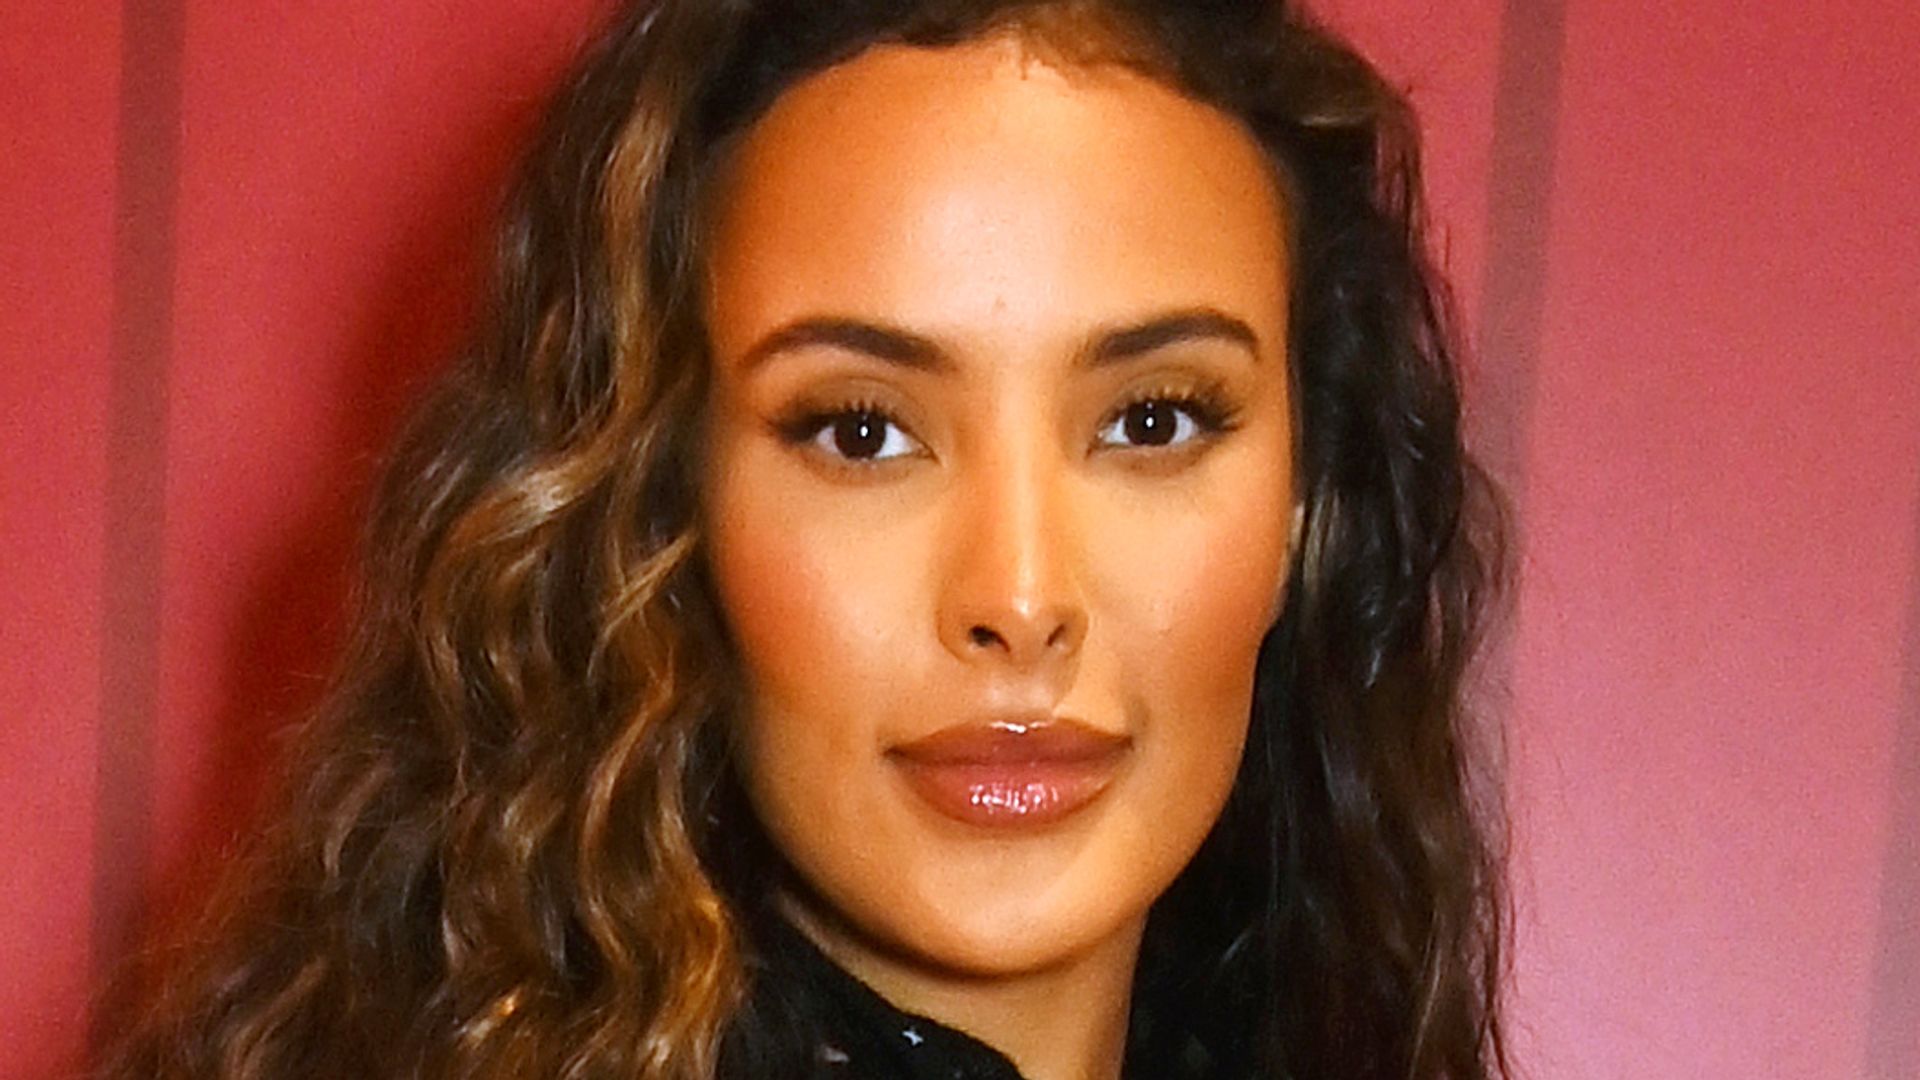 Maya Jama with glowing makeup and lighter hair at Rimmel London event